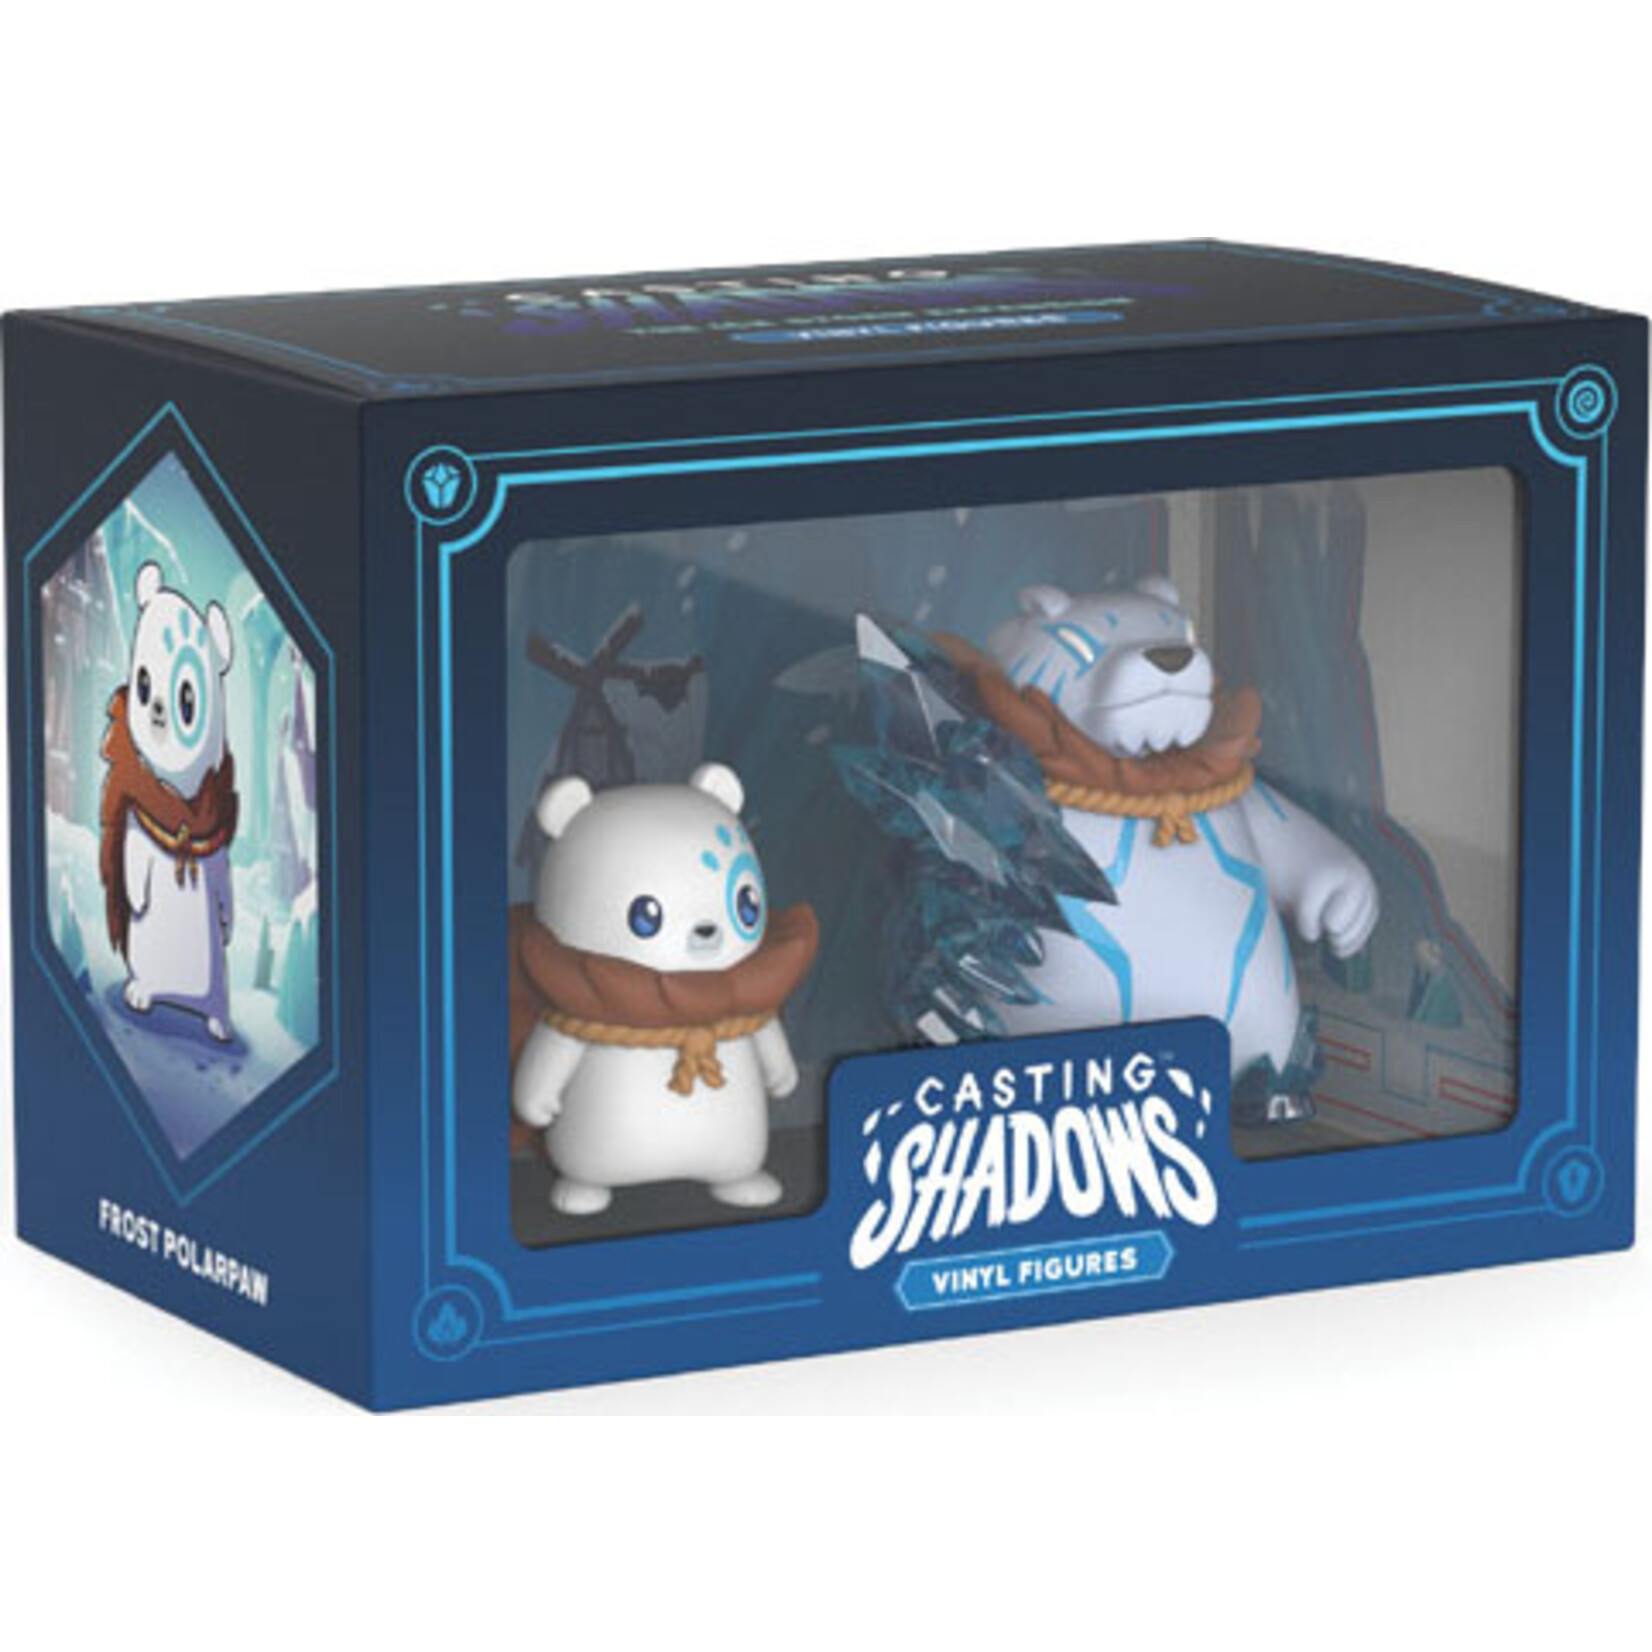 Tee Turtle Casting Shadows: Vinyl Figure Set - Frost Polarpaw & Frost the Merciless